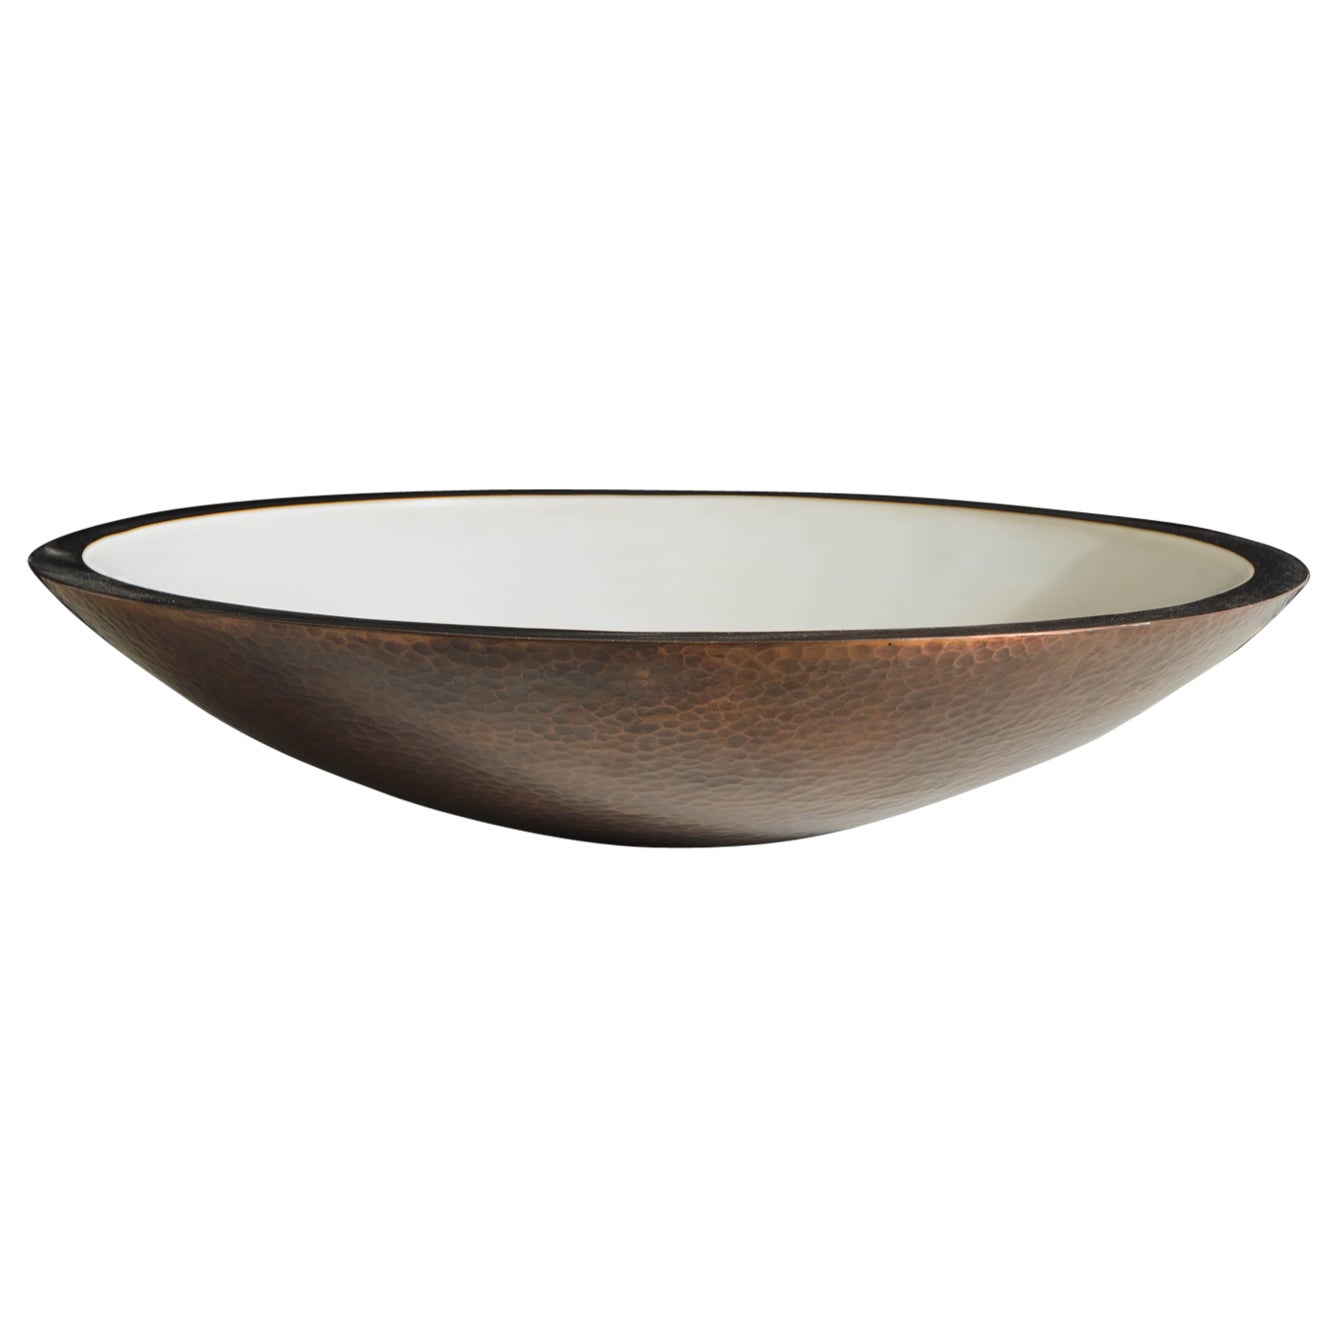 Contemporary Shallow Bowl in Cream Lacquer and Copper by Robert Kuo For Sale